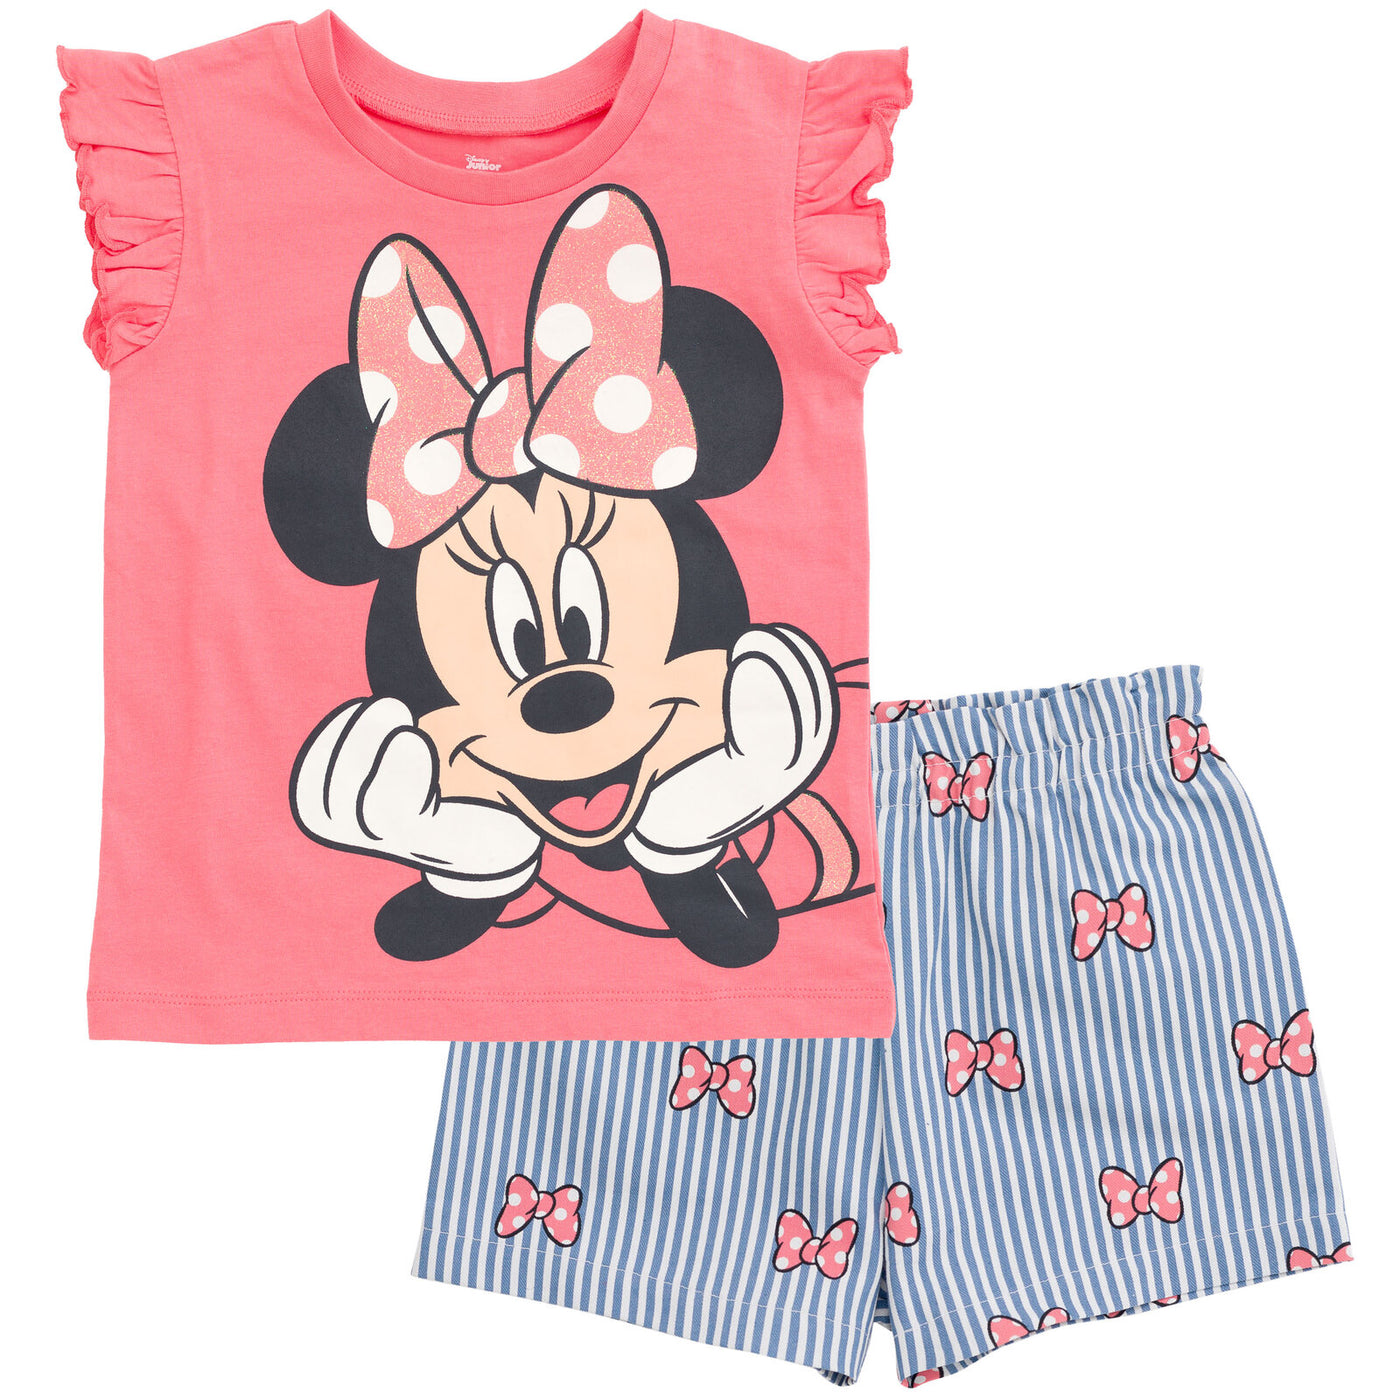 Disney Minnie Mouse Tank Top and Chambray Shorts Outfit Set